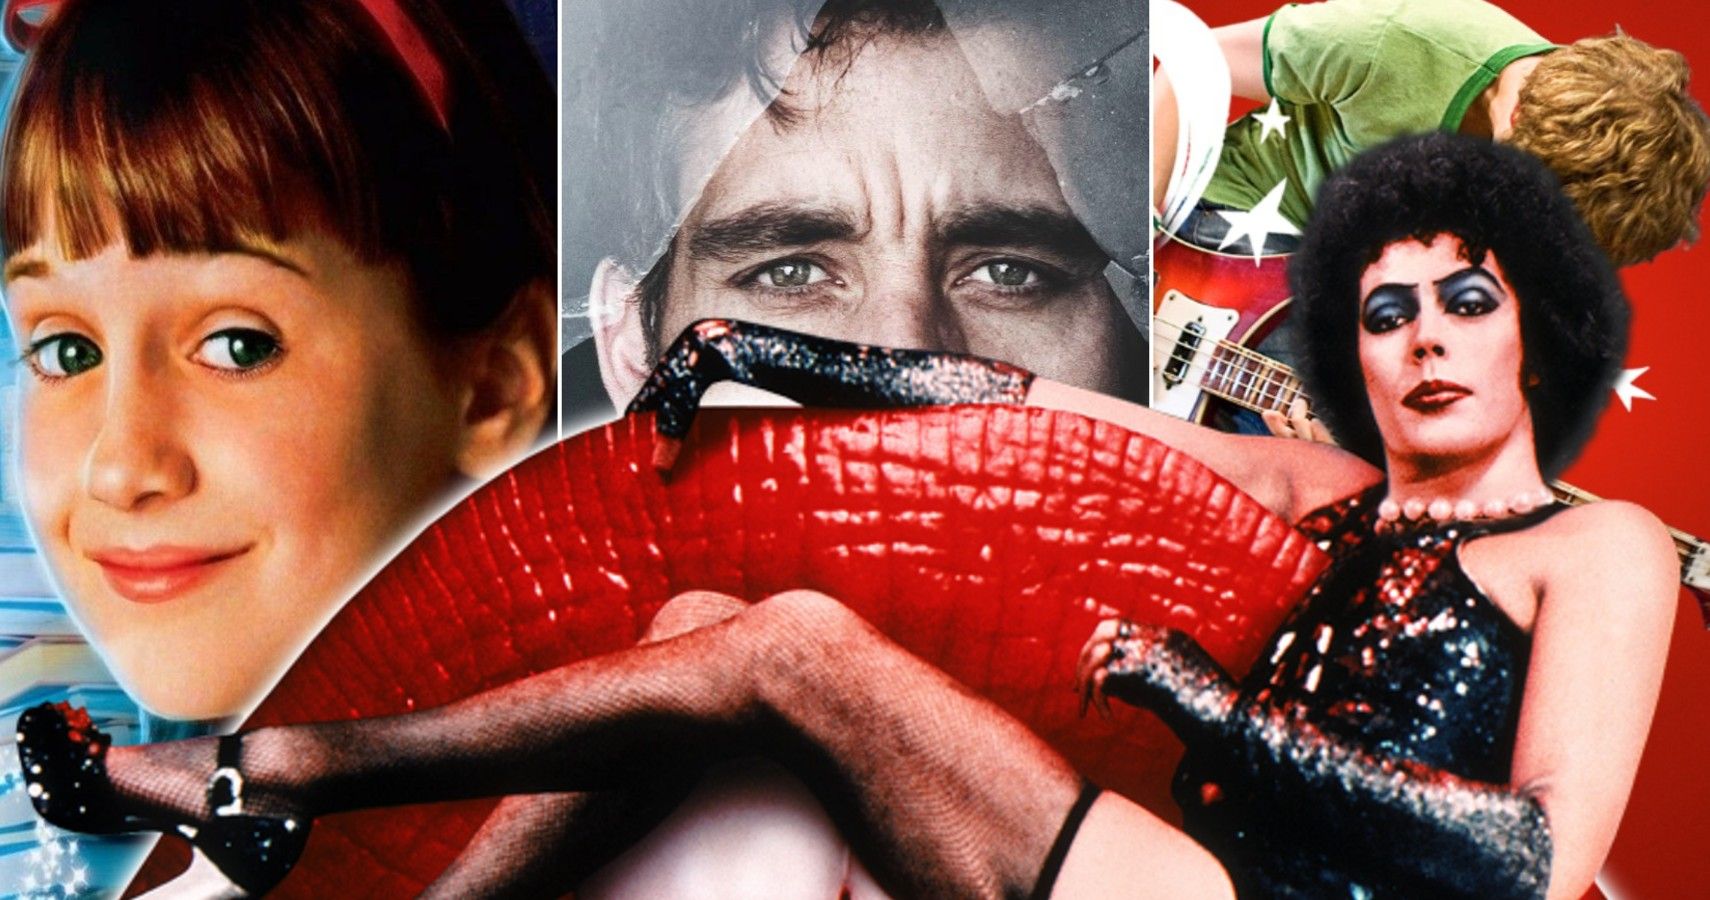 How 'The Rocky Horror Picture Show' Became an Enduring, $100 Million Brand